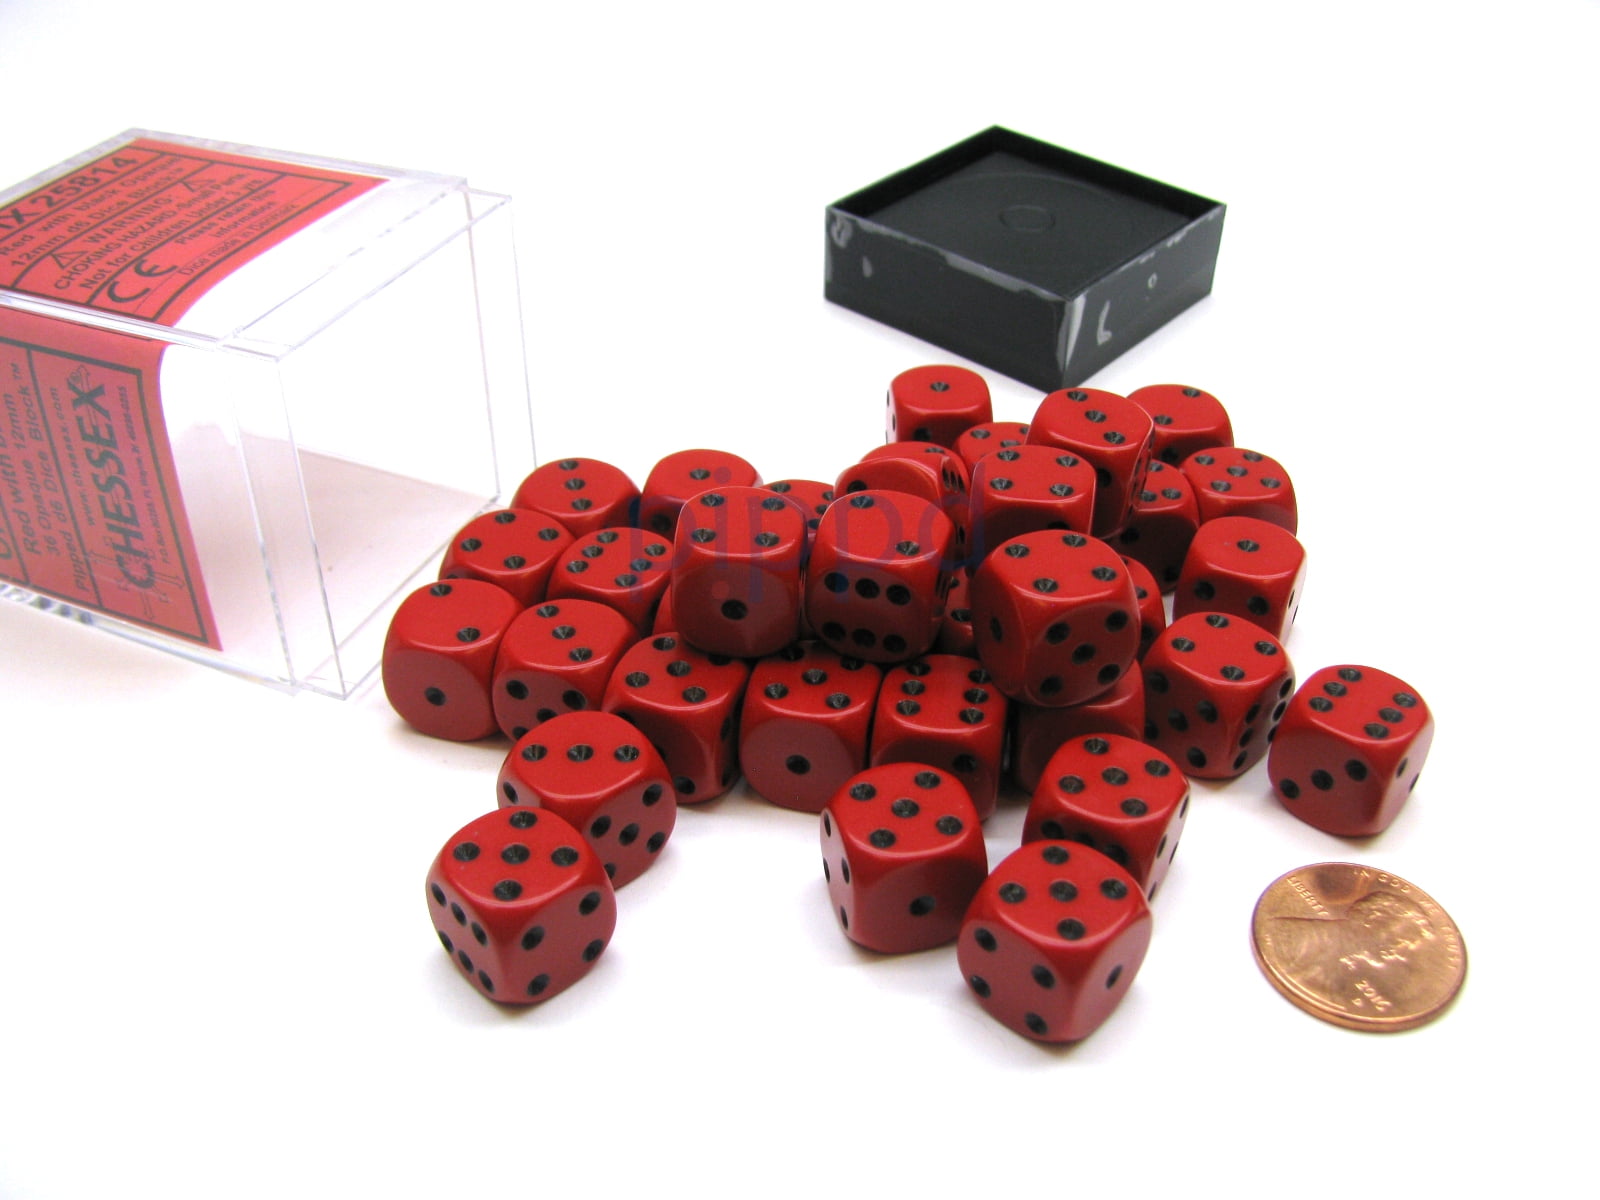 CHESSEX opaque 12mm SET OF D6 RED AND WHITE DICE 36 